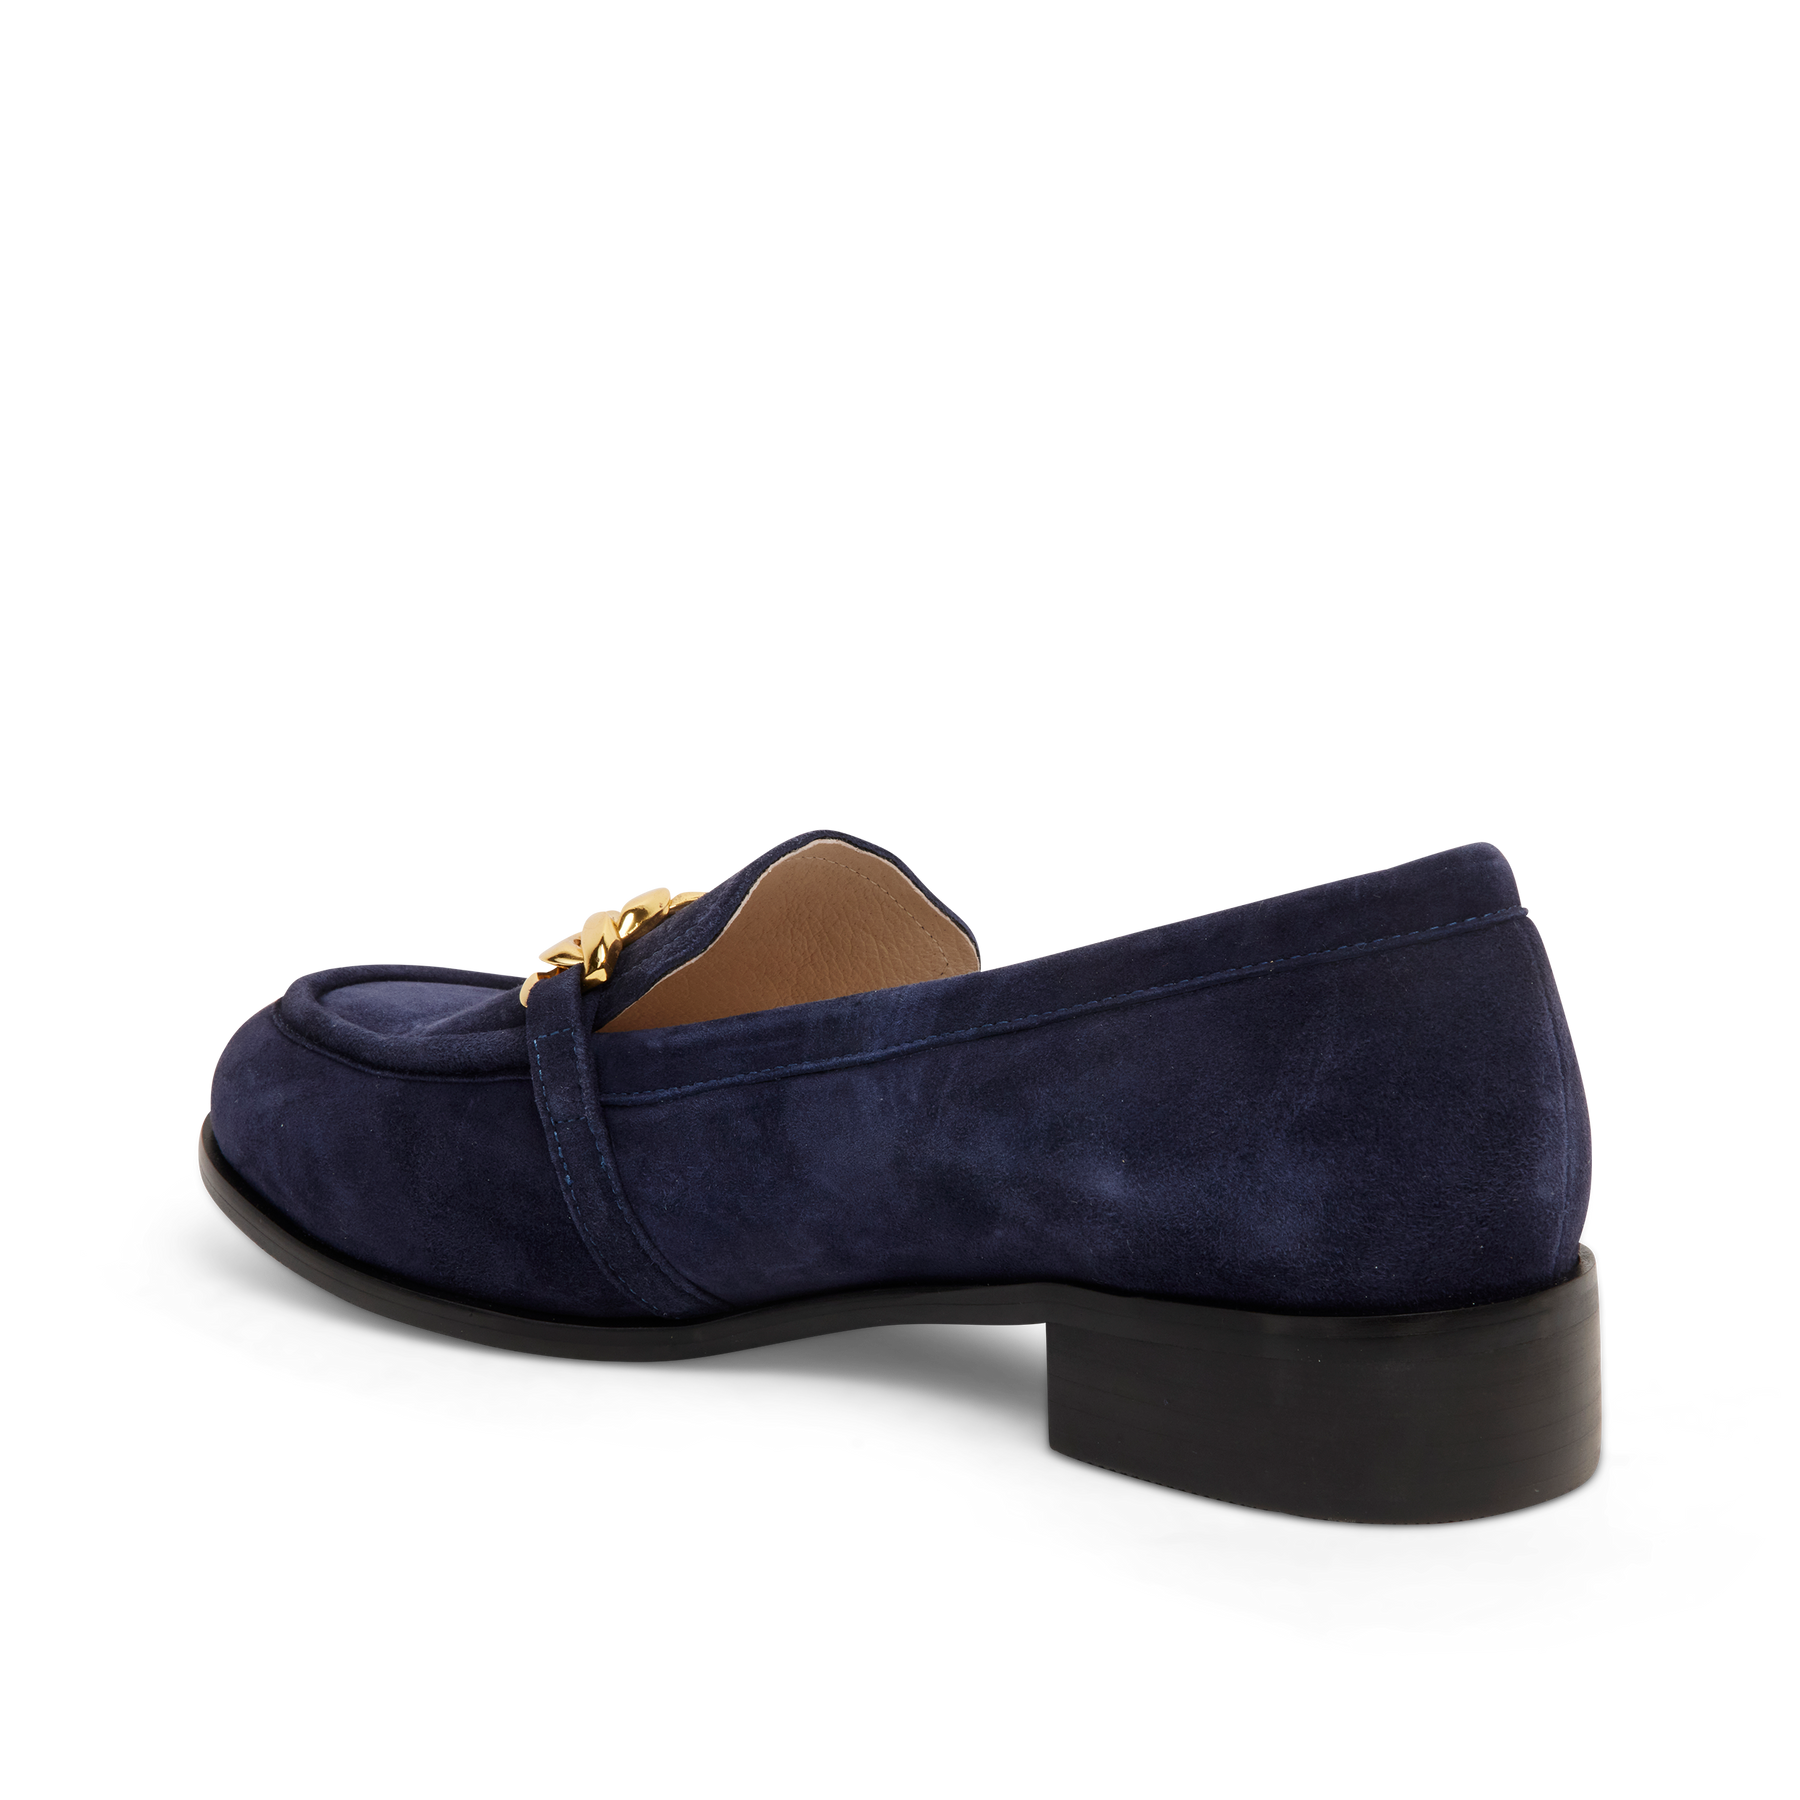 Kathryn Wilson Polly Loafer - Ink Suede